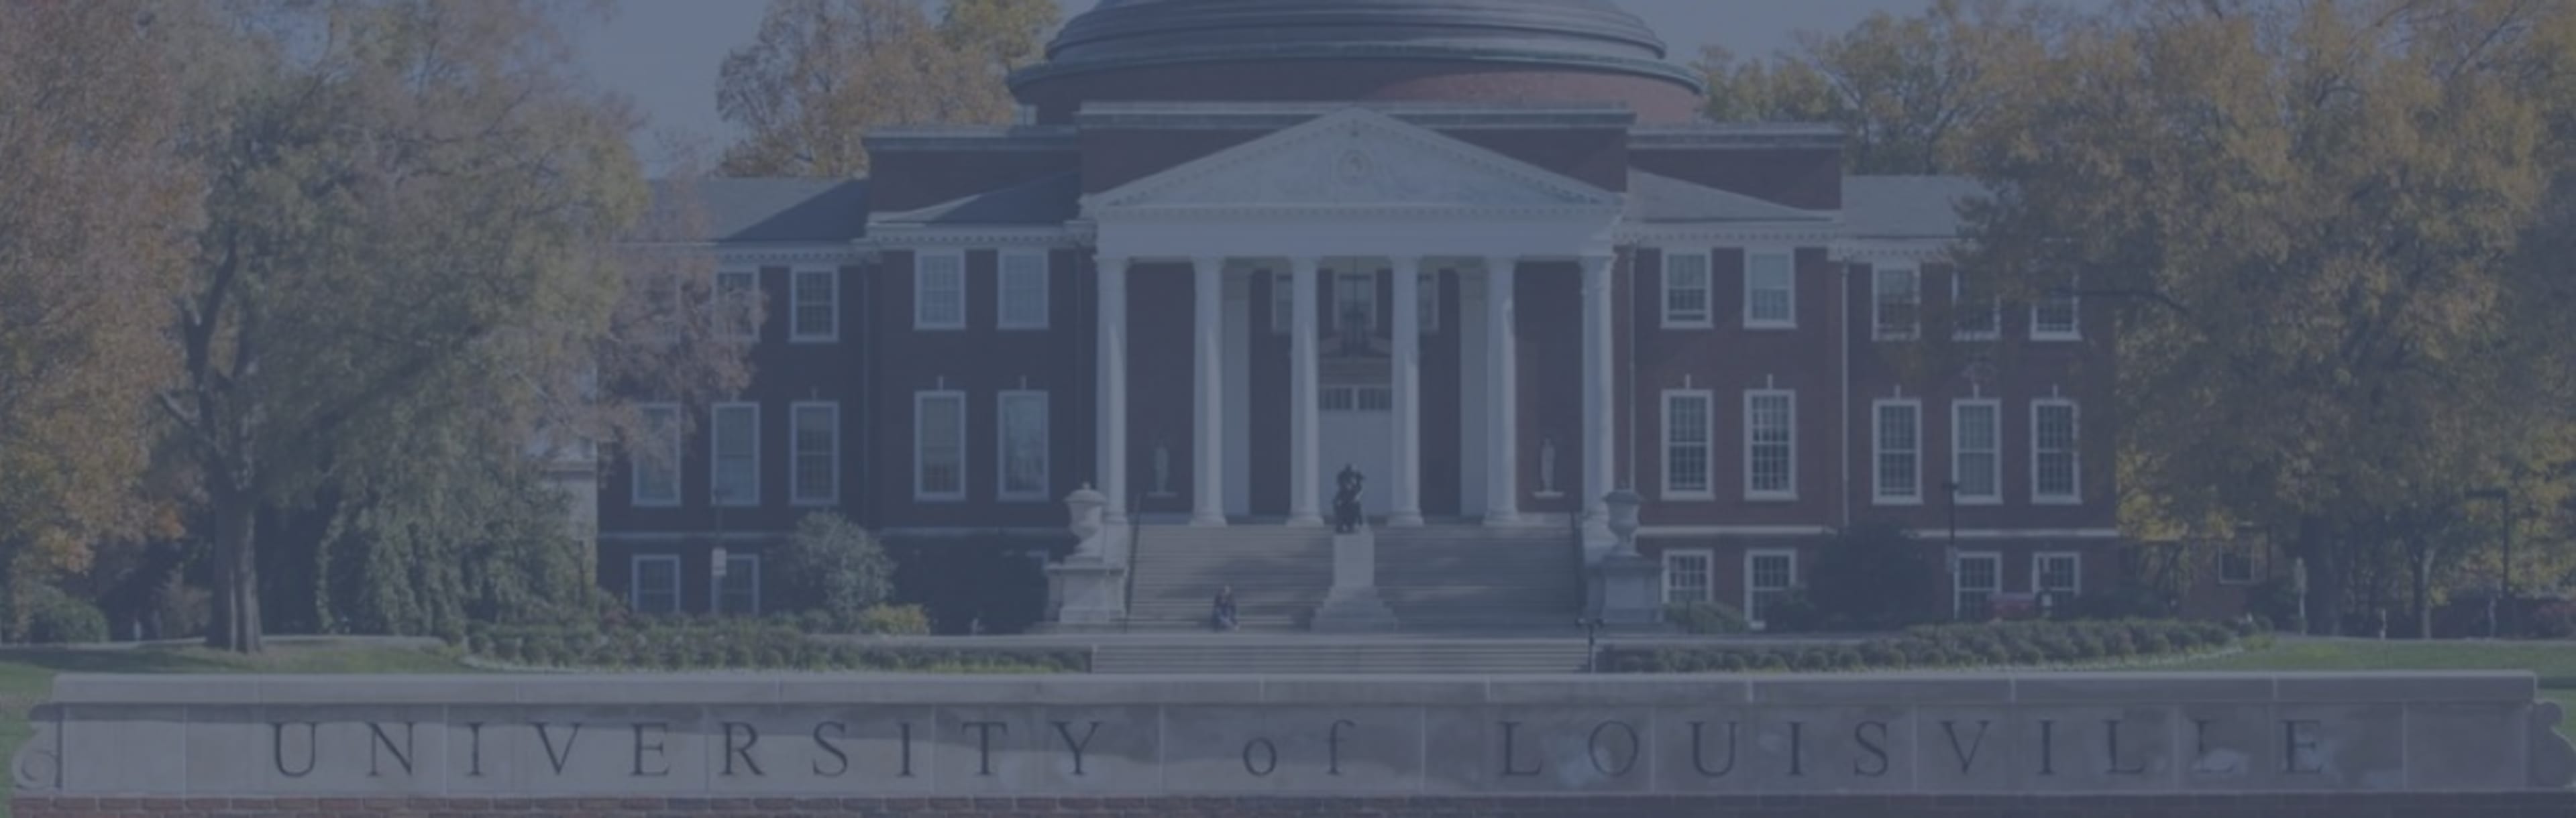 University of Louisville - School of Public Health and Information Sciences MS in epidemiologie